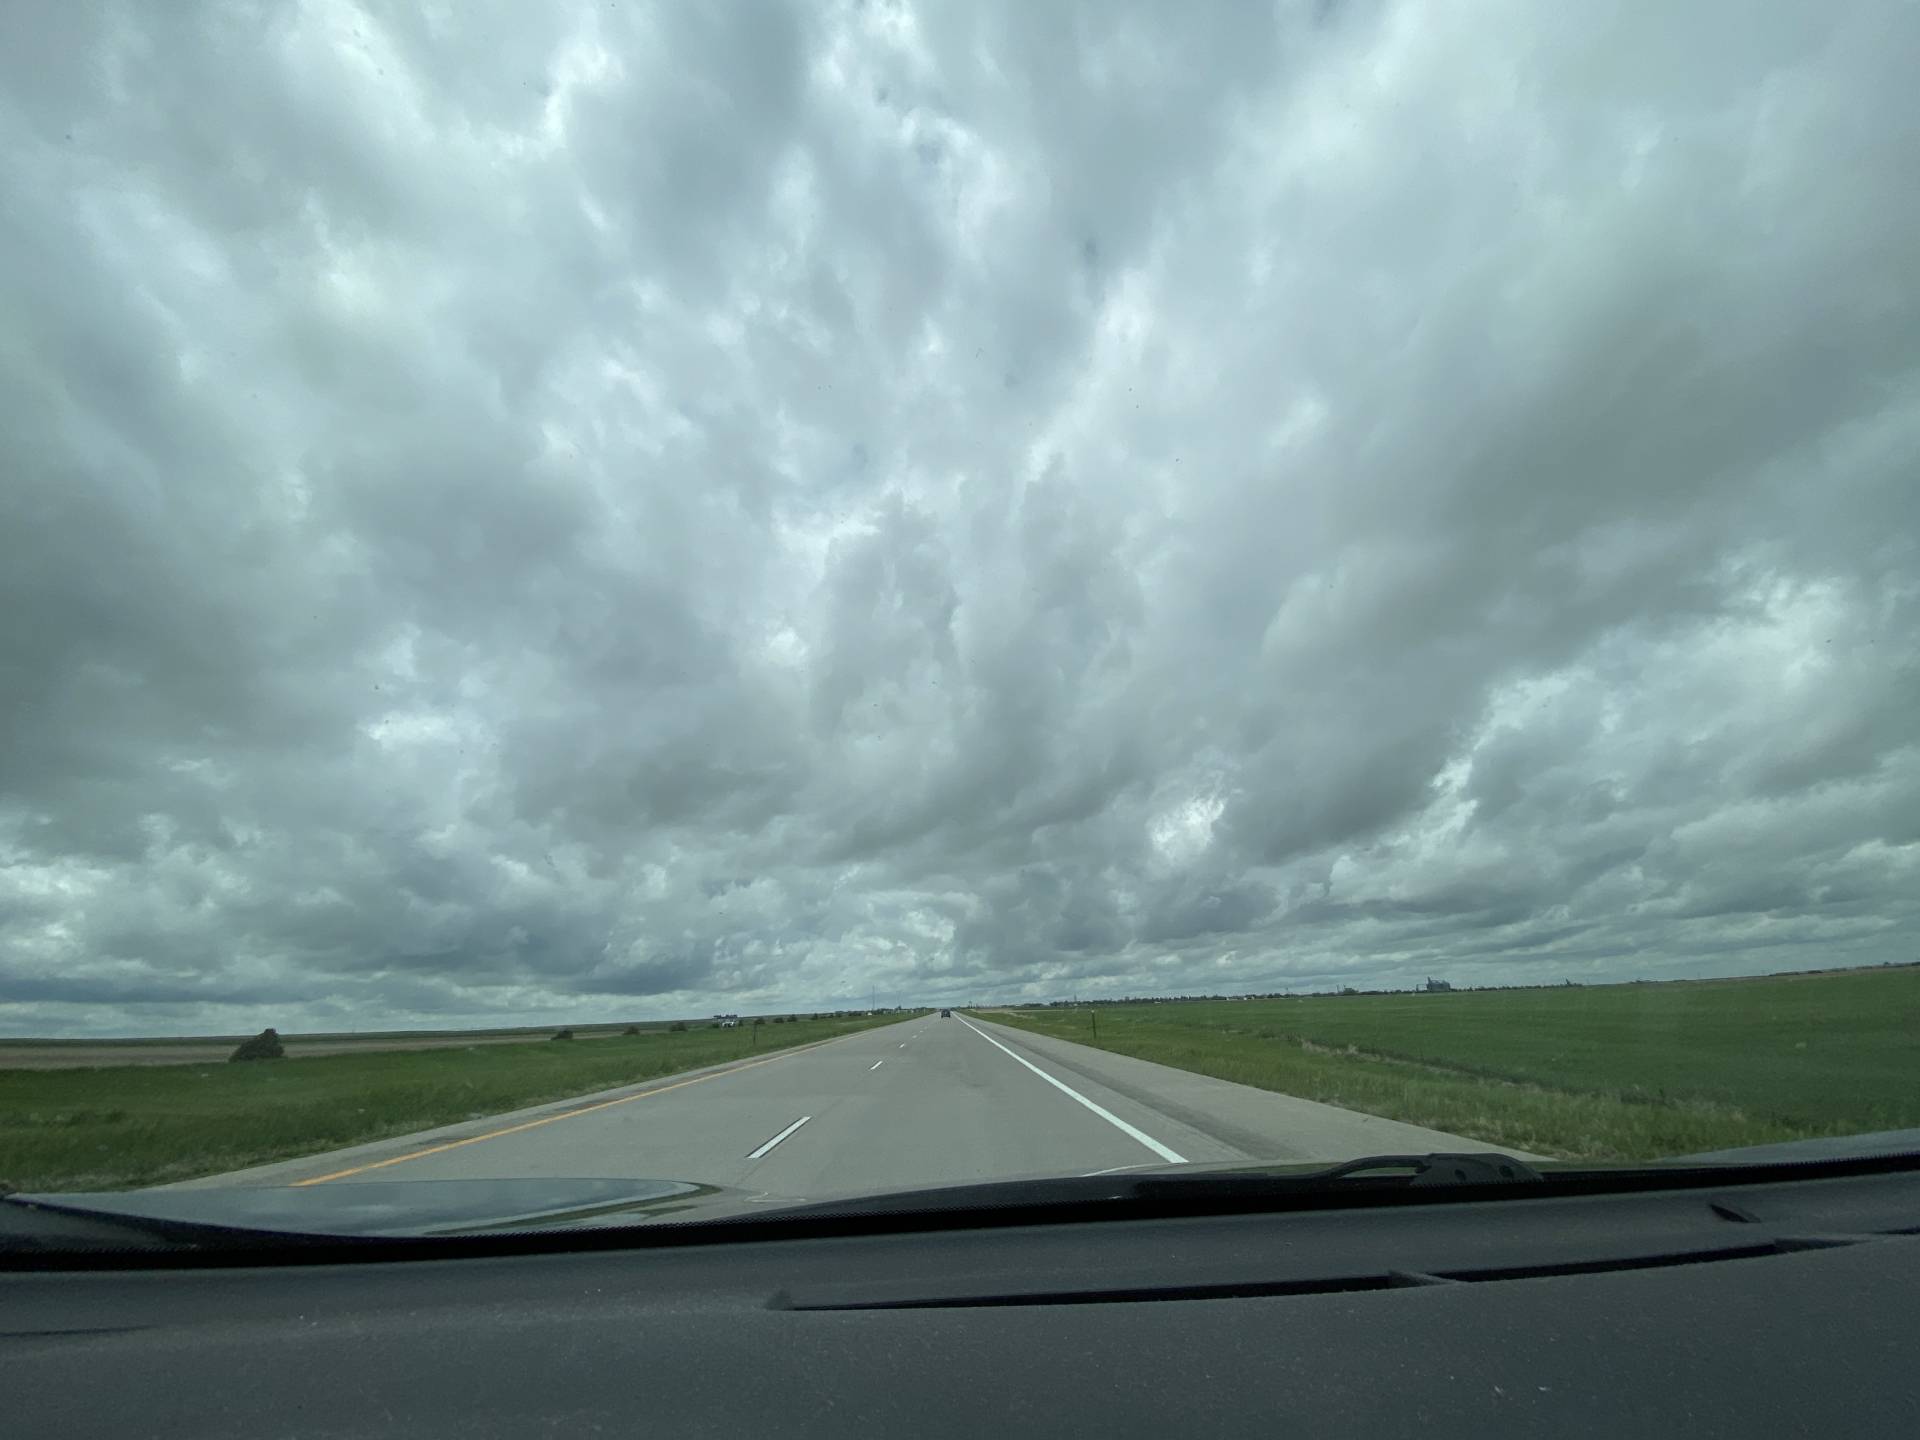 Heading west on I-70 for the first storm of the day. Video stream in a bit.